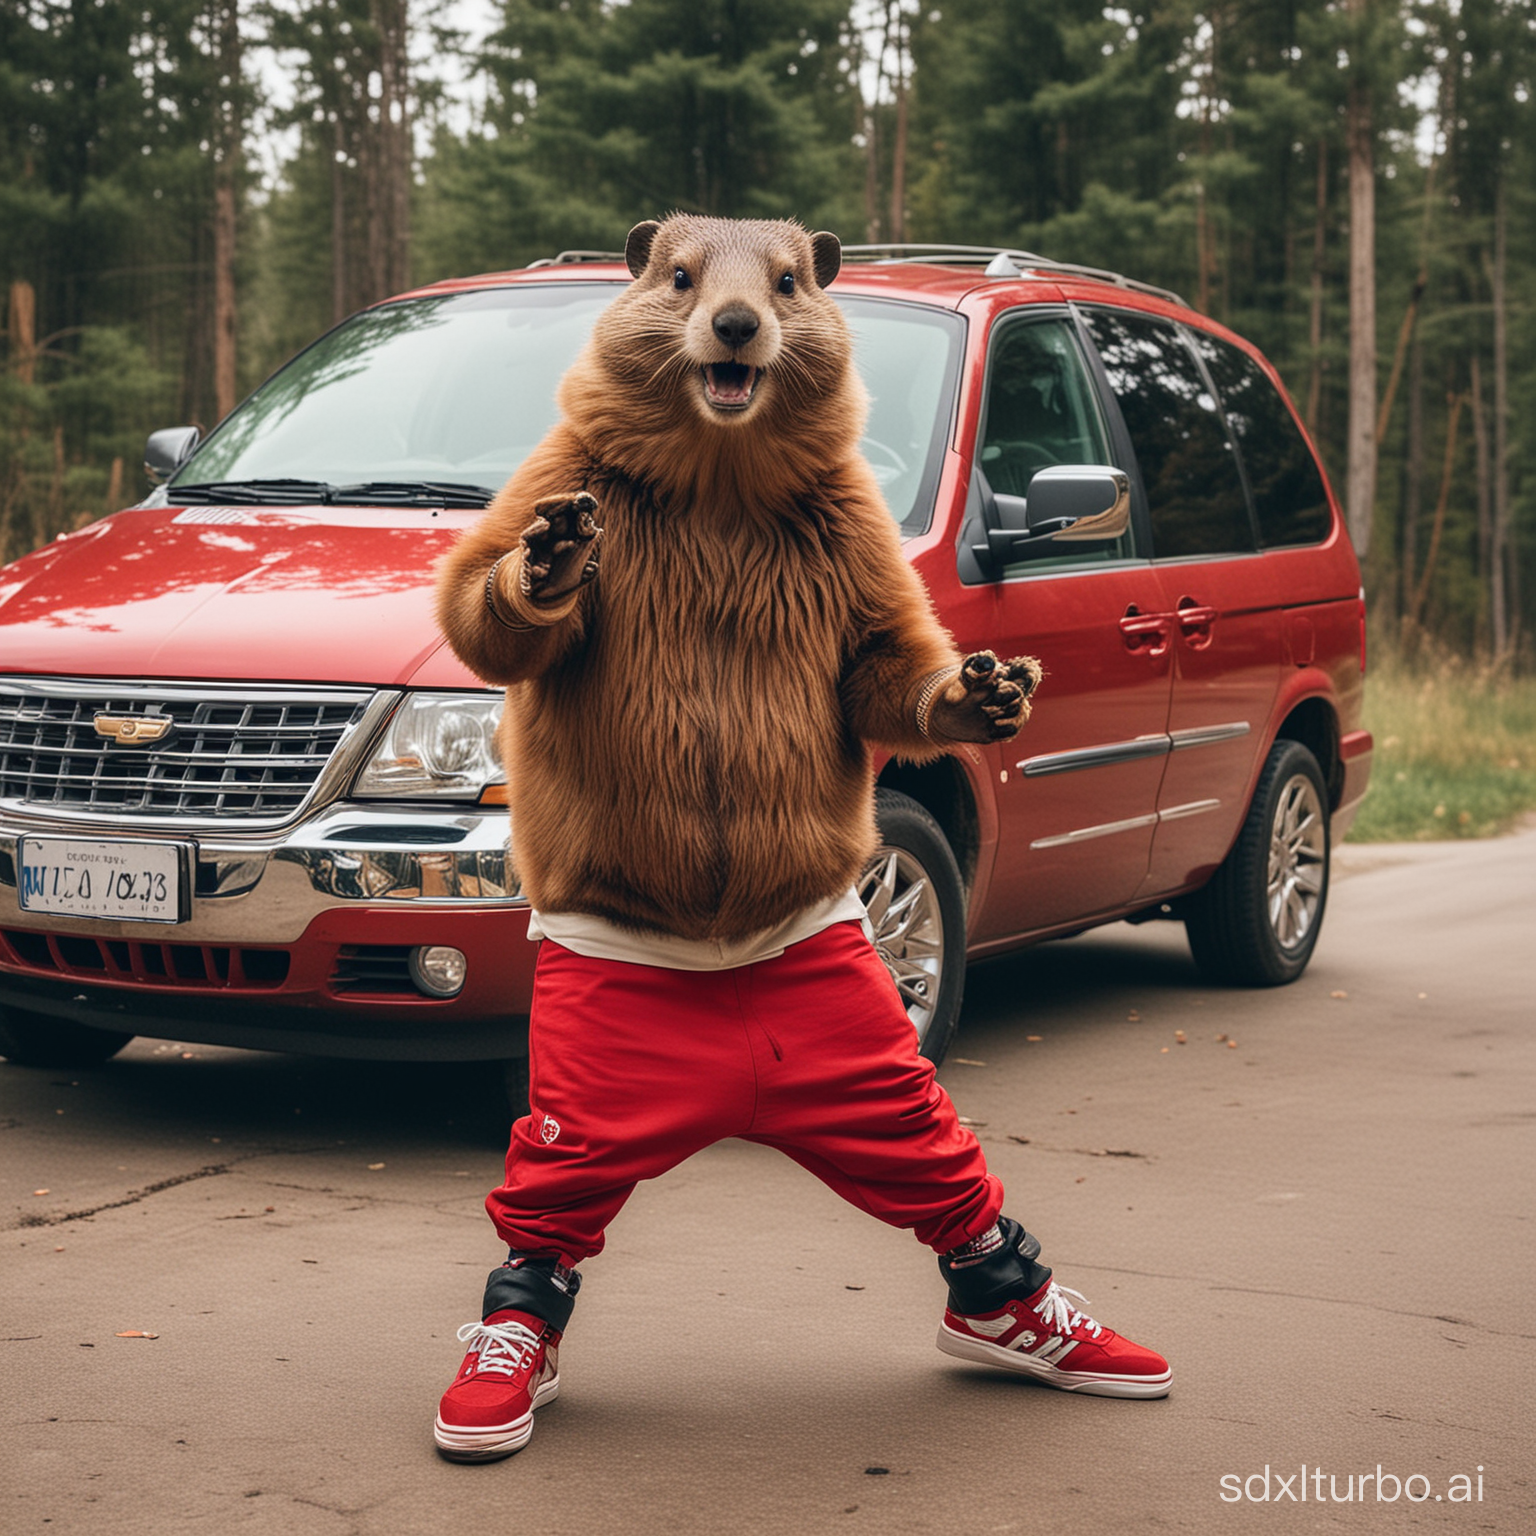 beaver in hip-hop clothes breakdancing in the background of a  red chrysler voyager